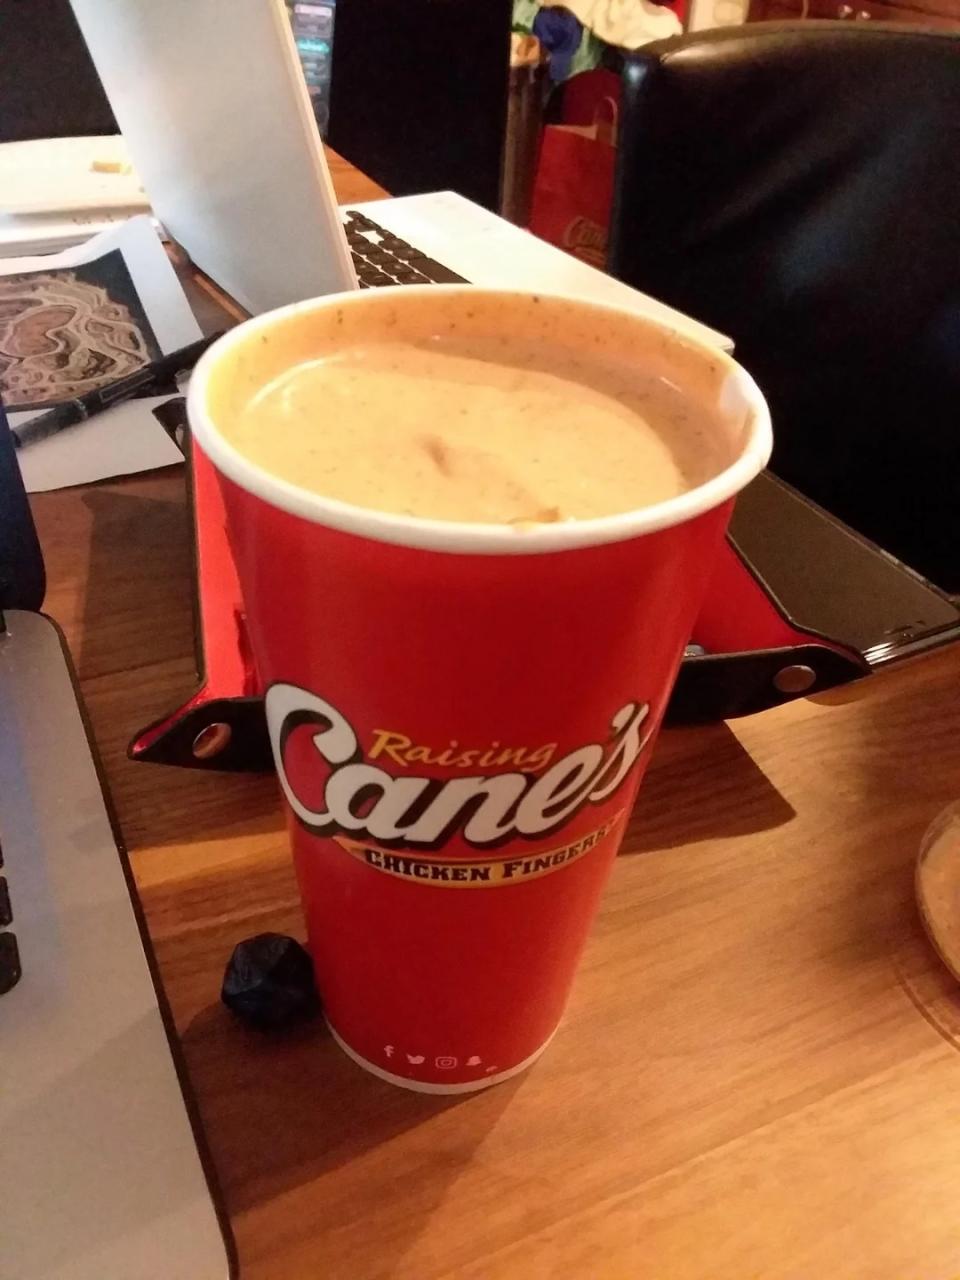 He places Cane's sauce-filled cup on a desk, with a laptop in the background